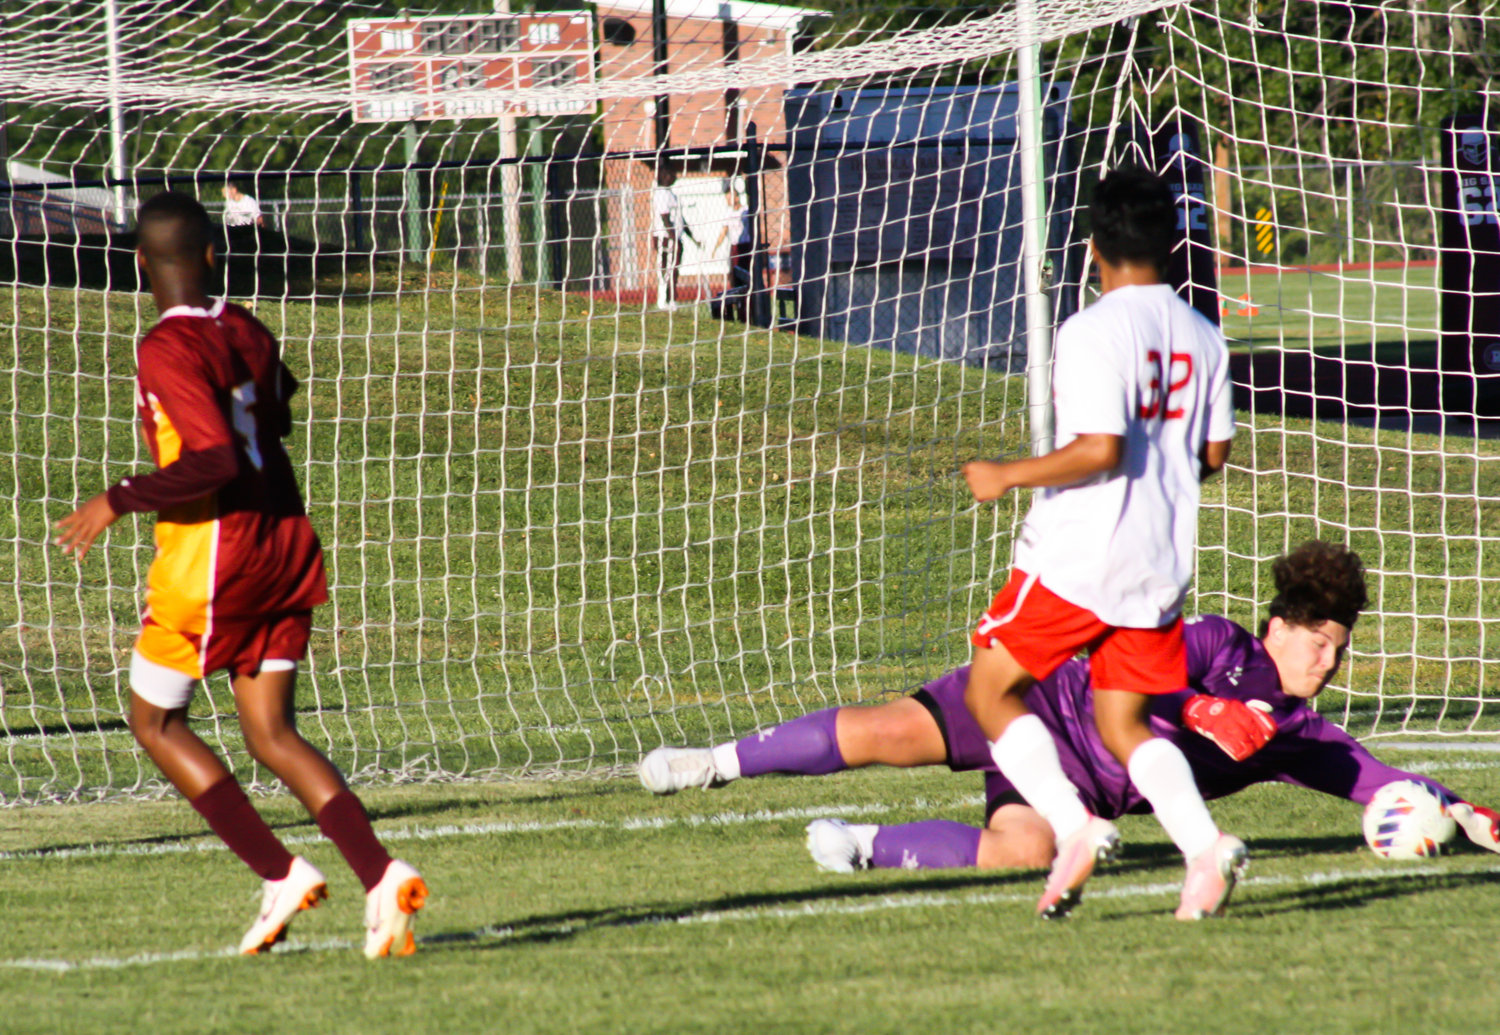 Mexico junior goalkeeper stops Missouri Military Academy senior midfielder Kellan Mugisha's shot in the first half of MMA's 3-1 victory between the crosstown teams. Scanavino made 12 saves but allowed a goal to Mugisha and two to Gorka Yarte.